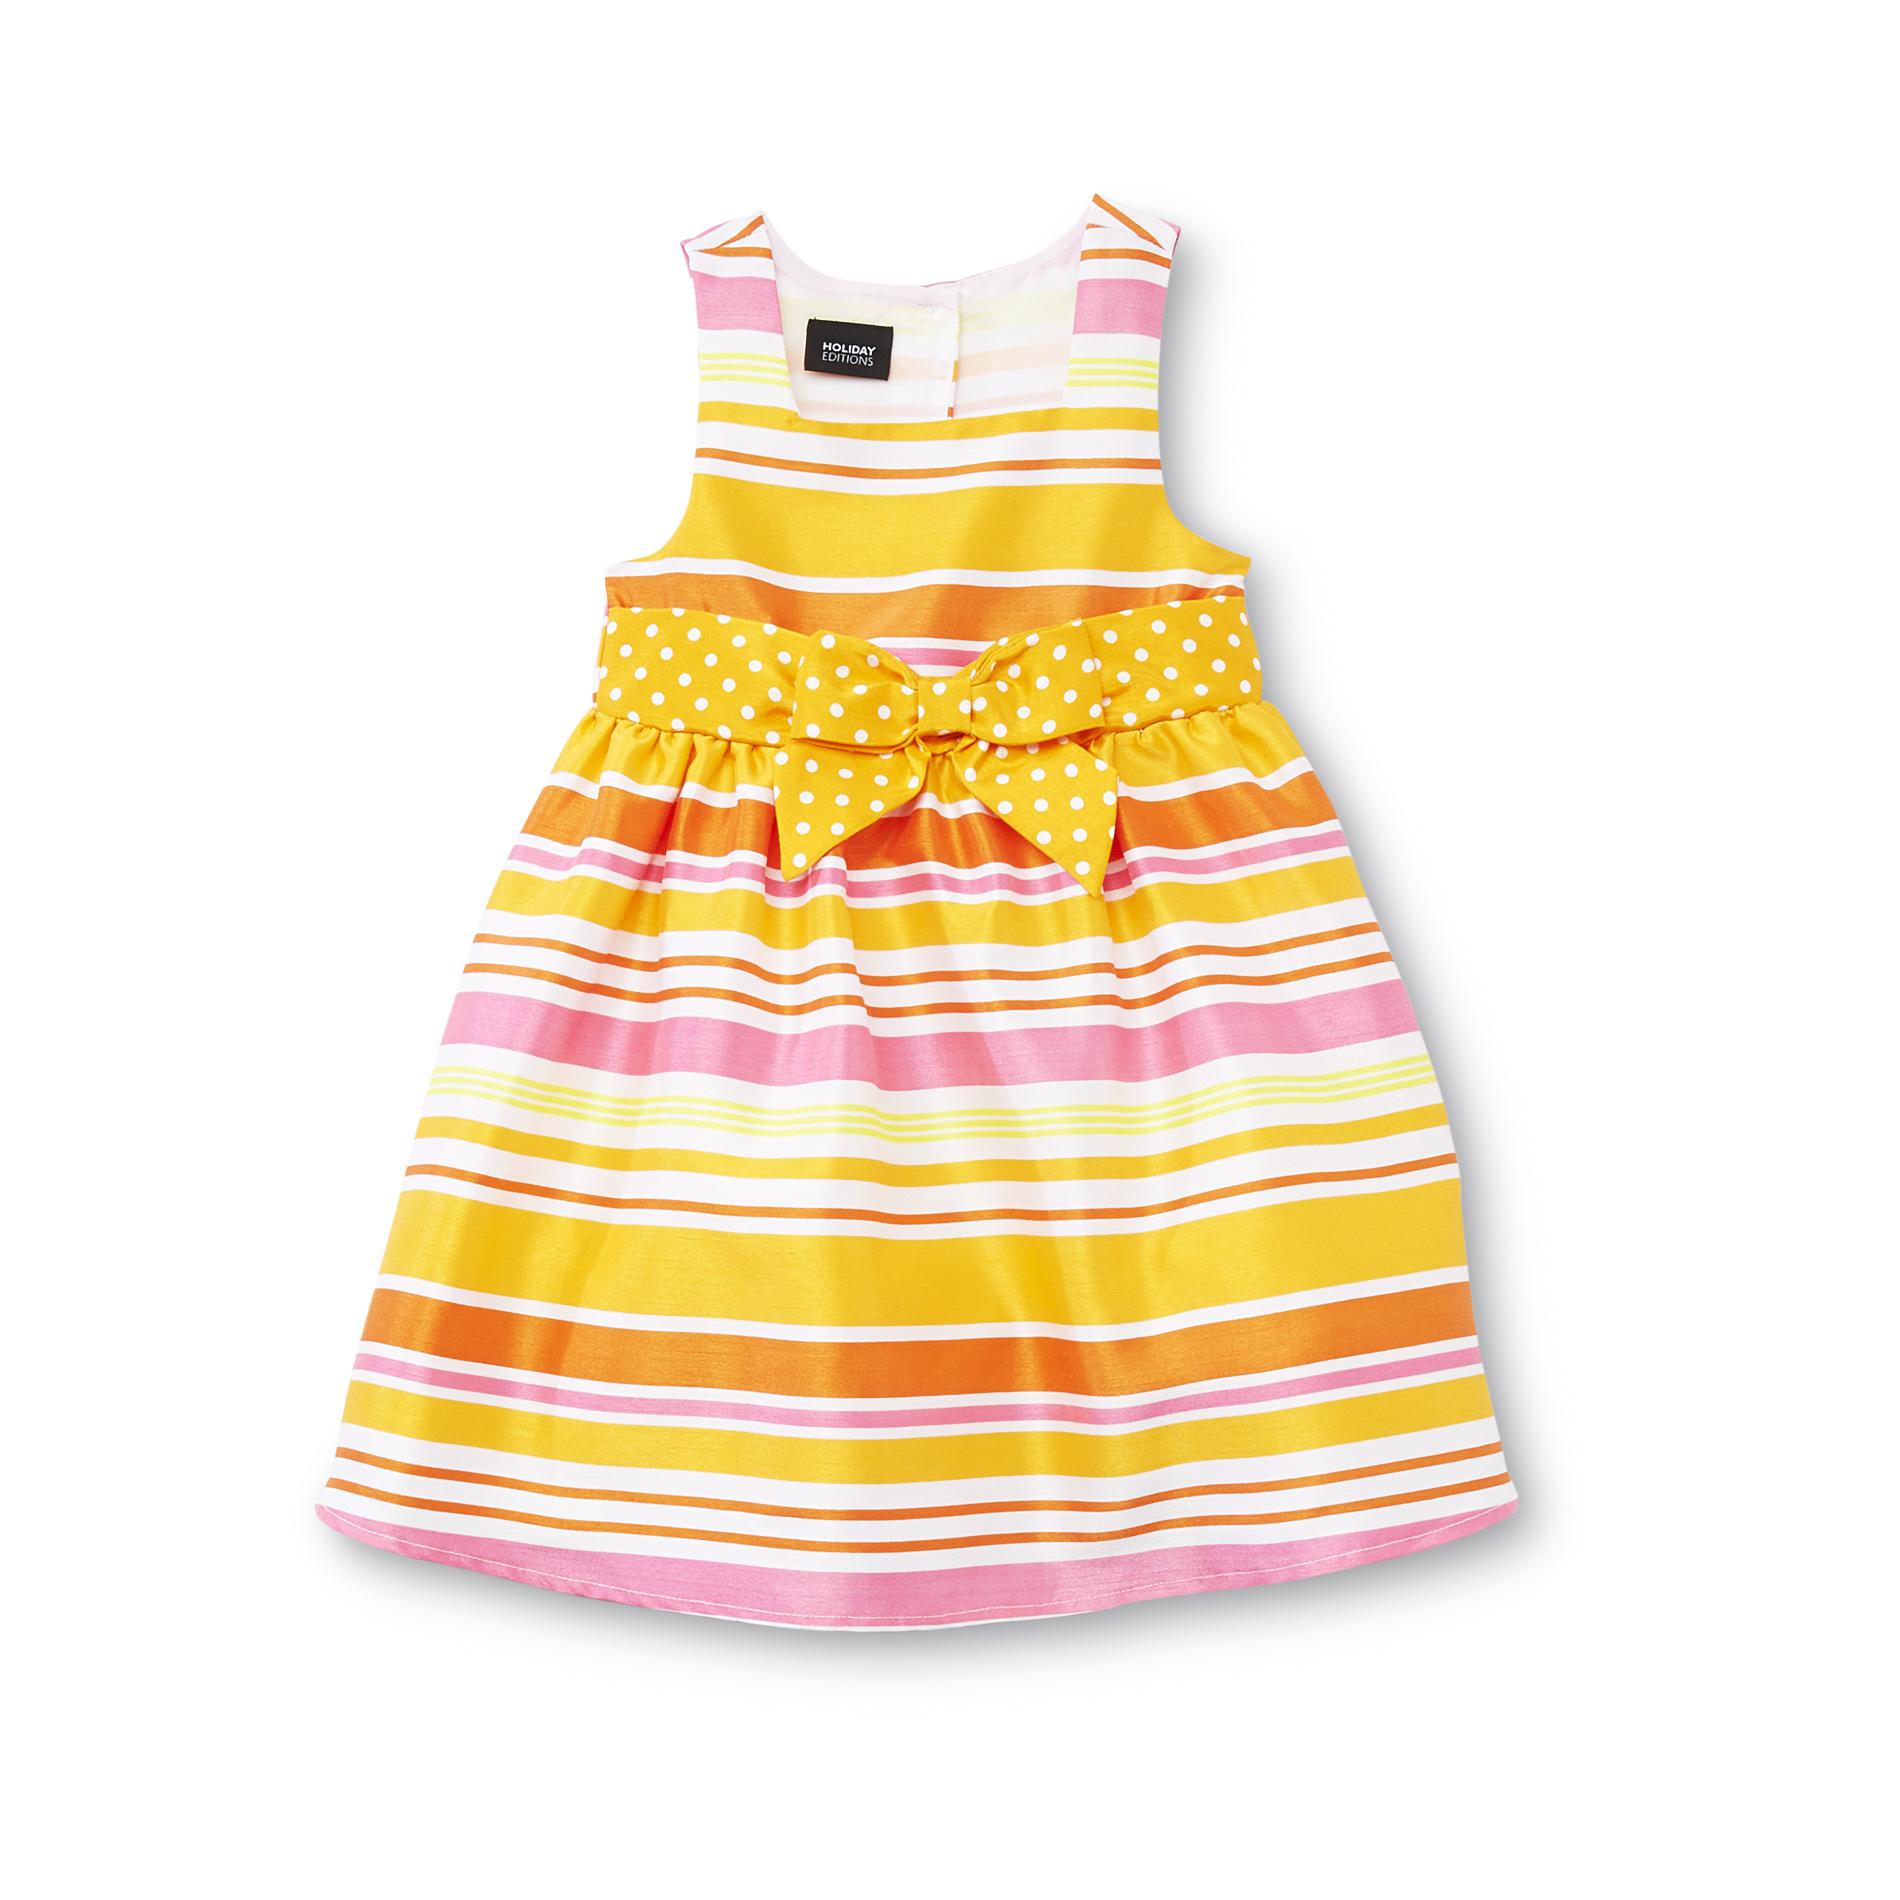 Holiday Editions Infant & Toddler Girl's Sleeveless Dress - Stripes